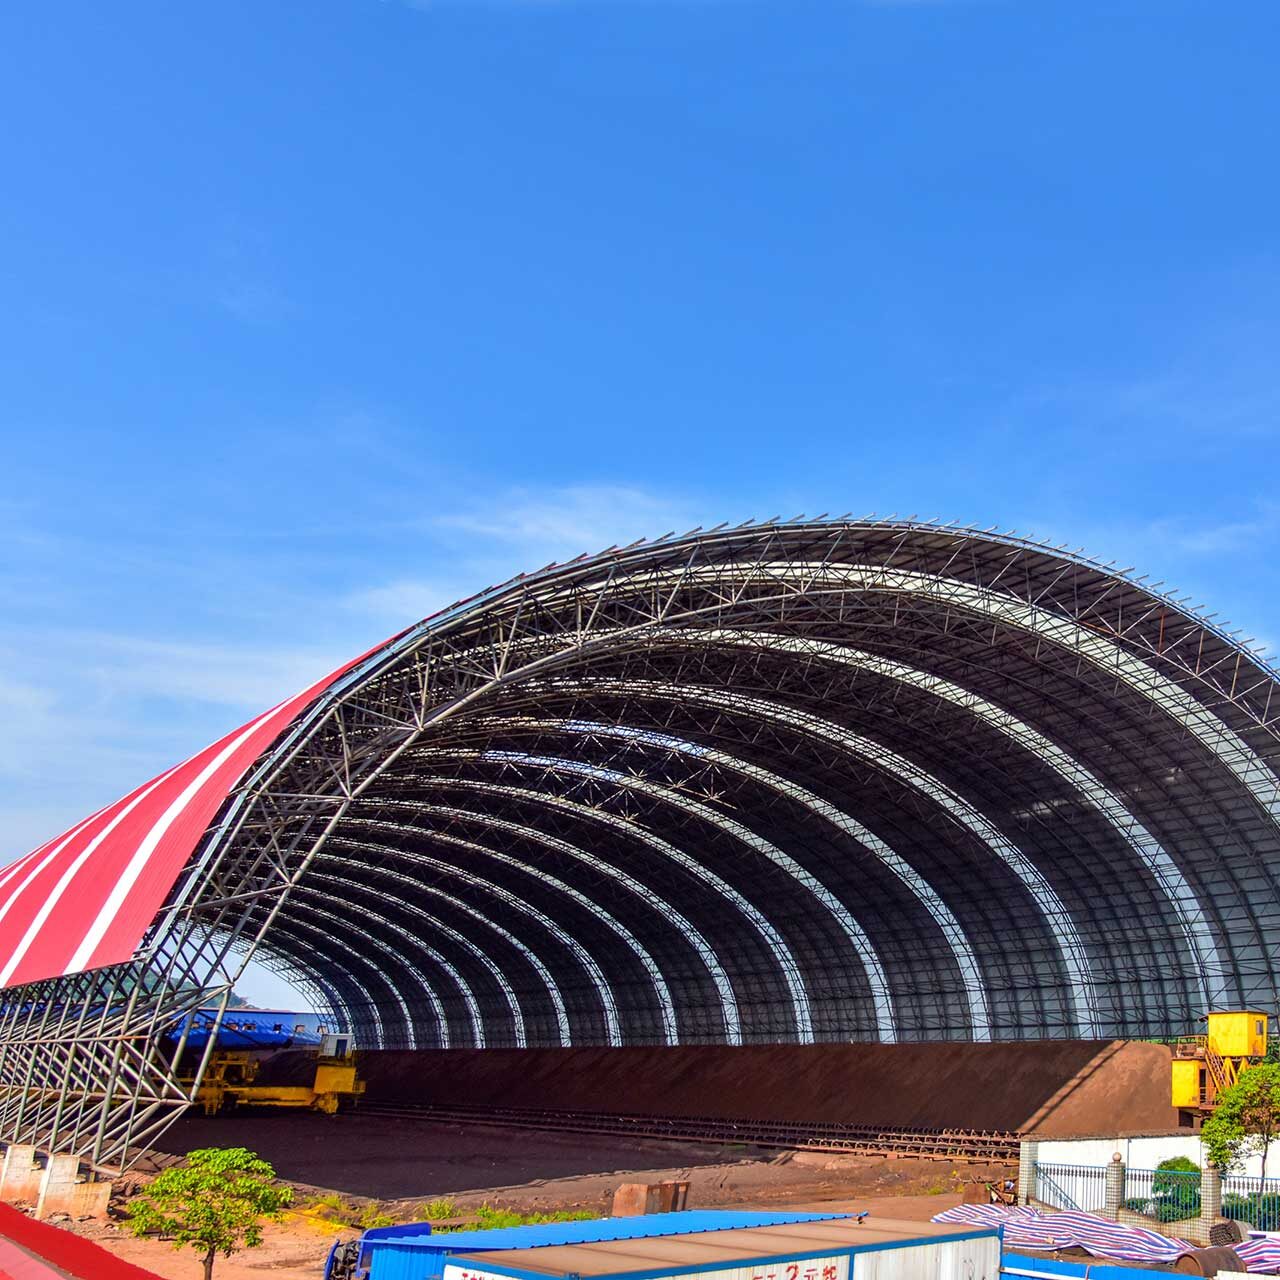 The raw material shed of Anyang Iron & Steel Group